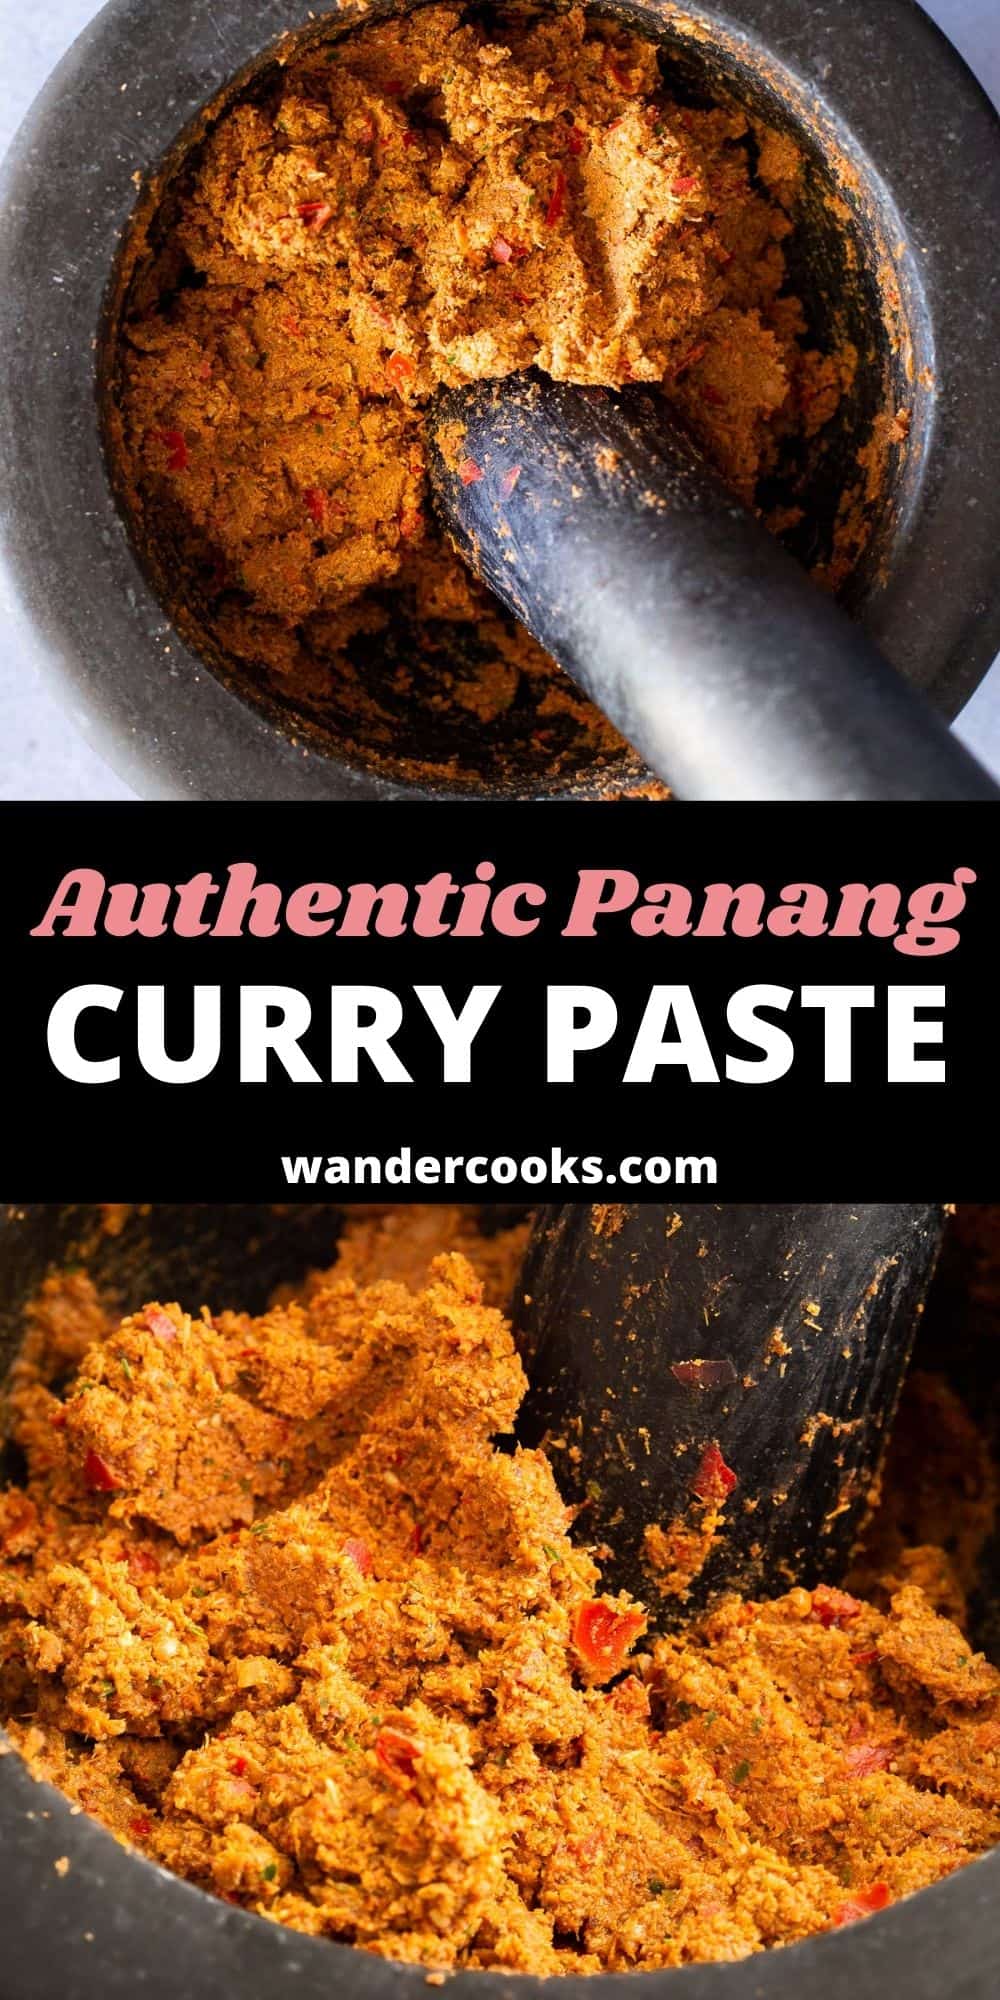 Authentic Thai Panang Curry Paste